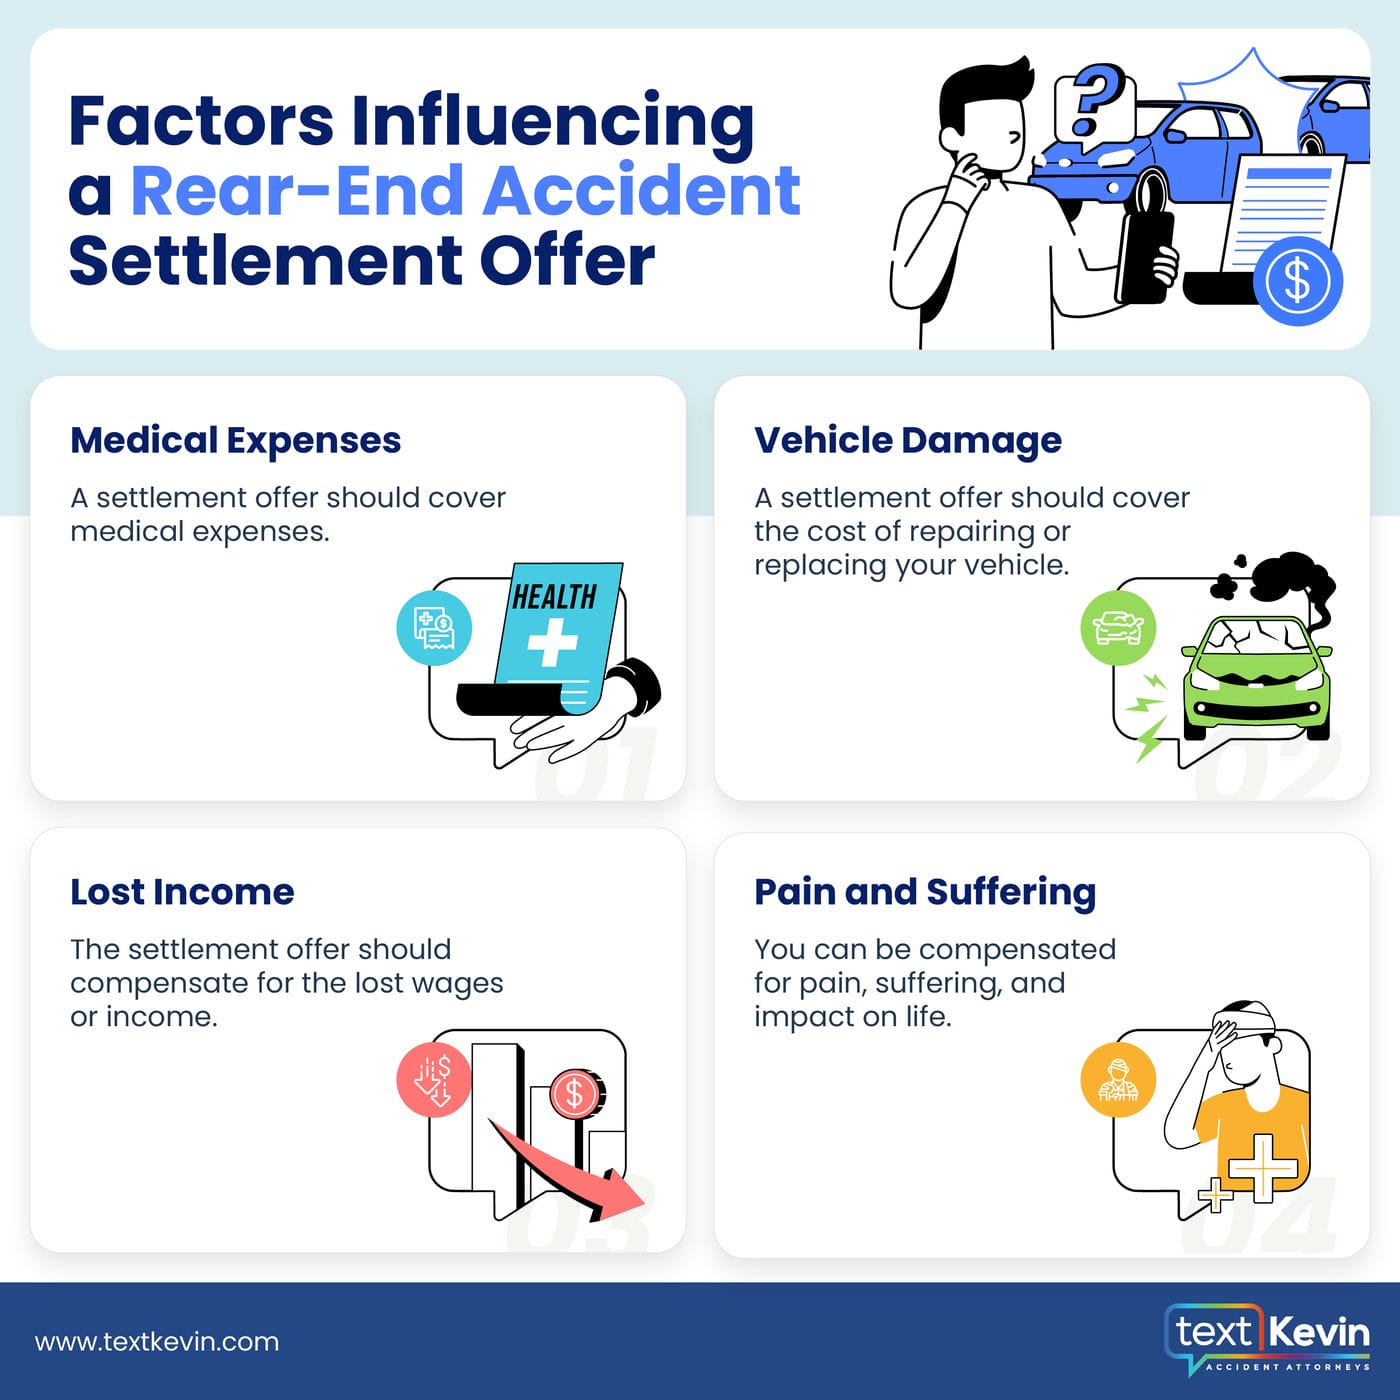 Infographic explaining factors influencing a rear-end accident settlement offer: medical expenses, vehicle damage, lost income, and compensation for pain and suffering.